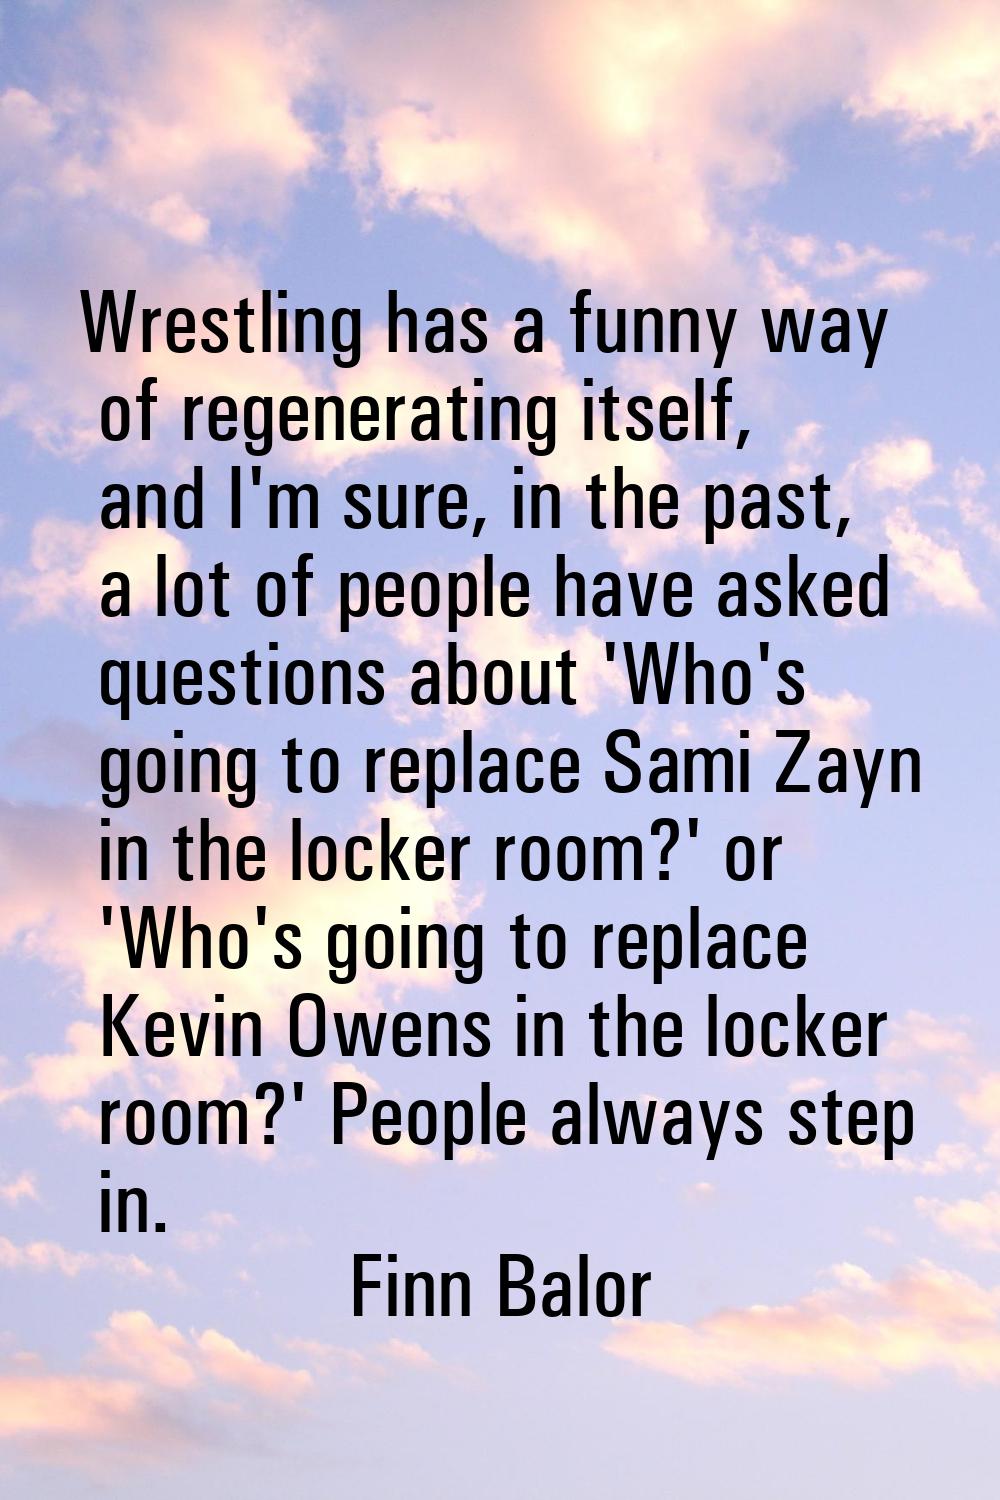 Wrestling has a funny way of regenerating itself, and I'm sure, in the past, a lot of people have a